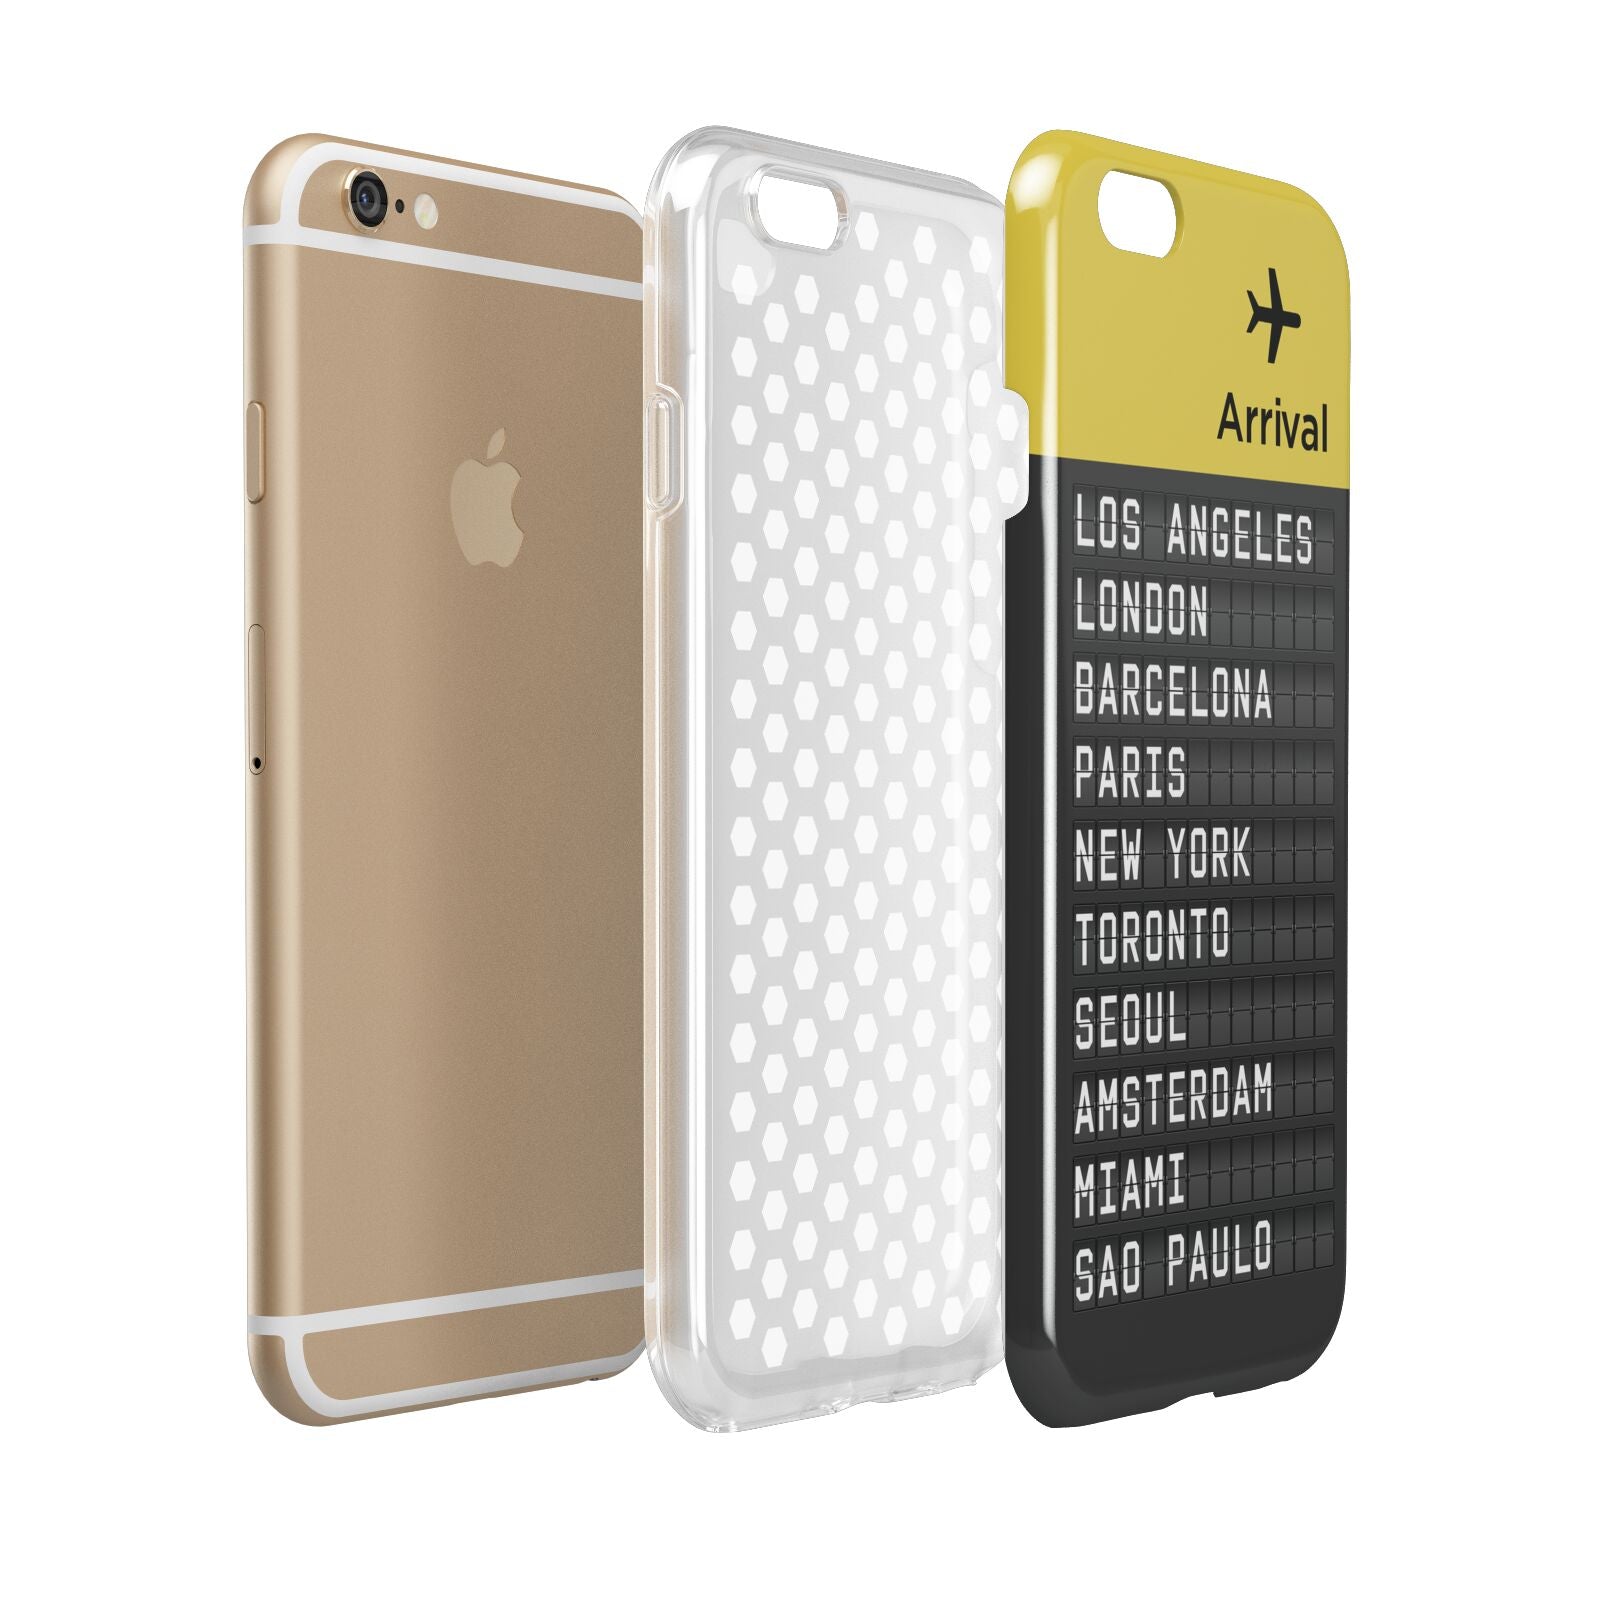 Airport Arrivals Board Apple iPhone 6 3D Tough Case Expanded view